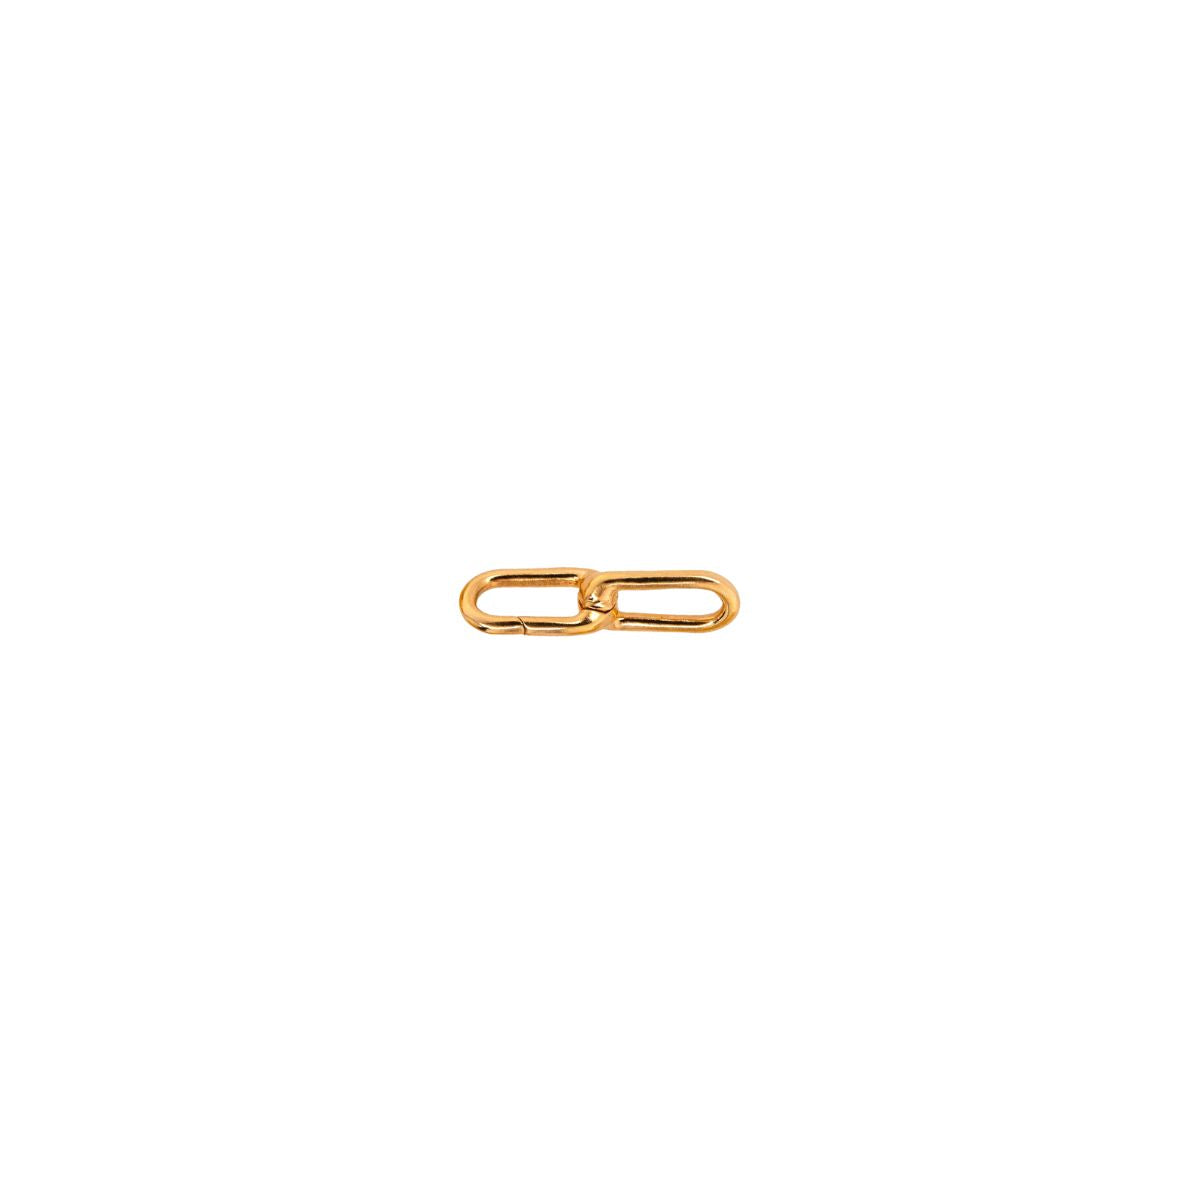 Bridget King Timeless Double-Link Clasp in Yellow Gold